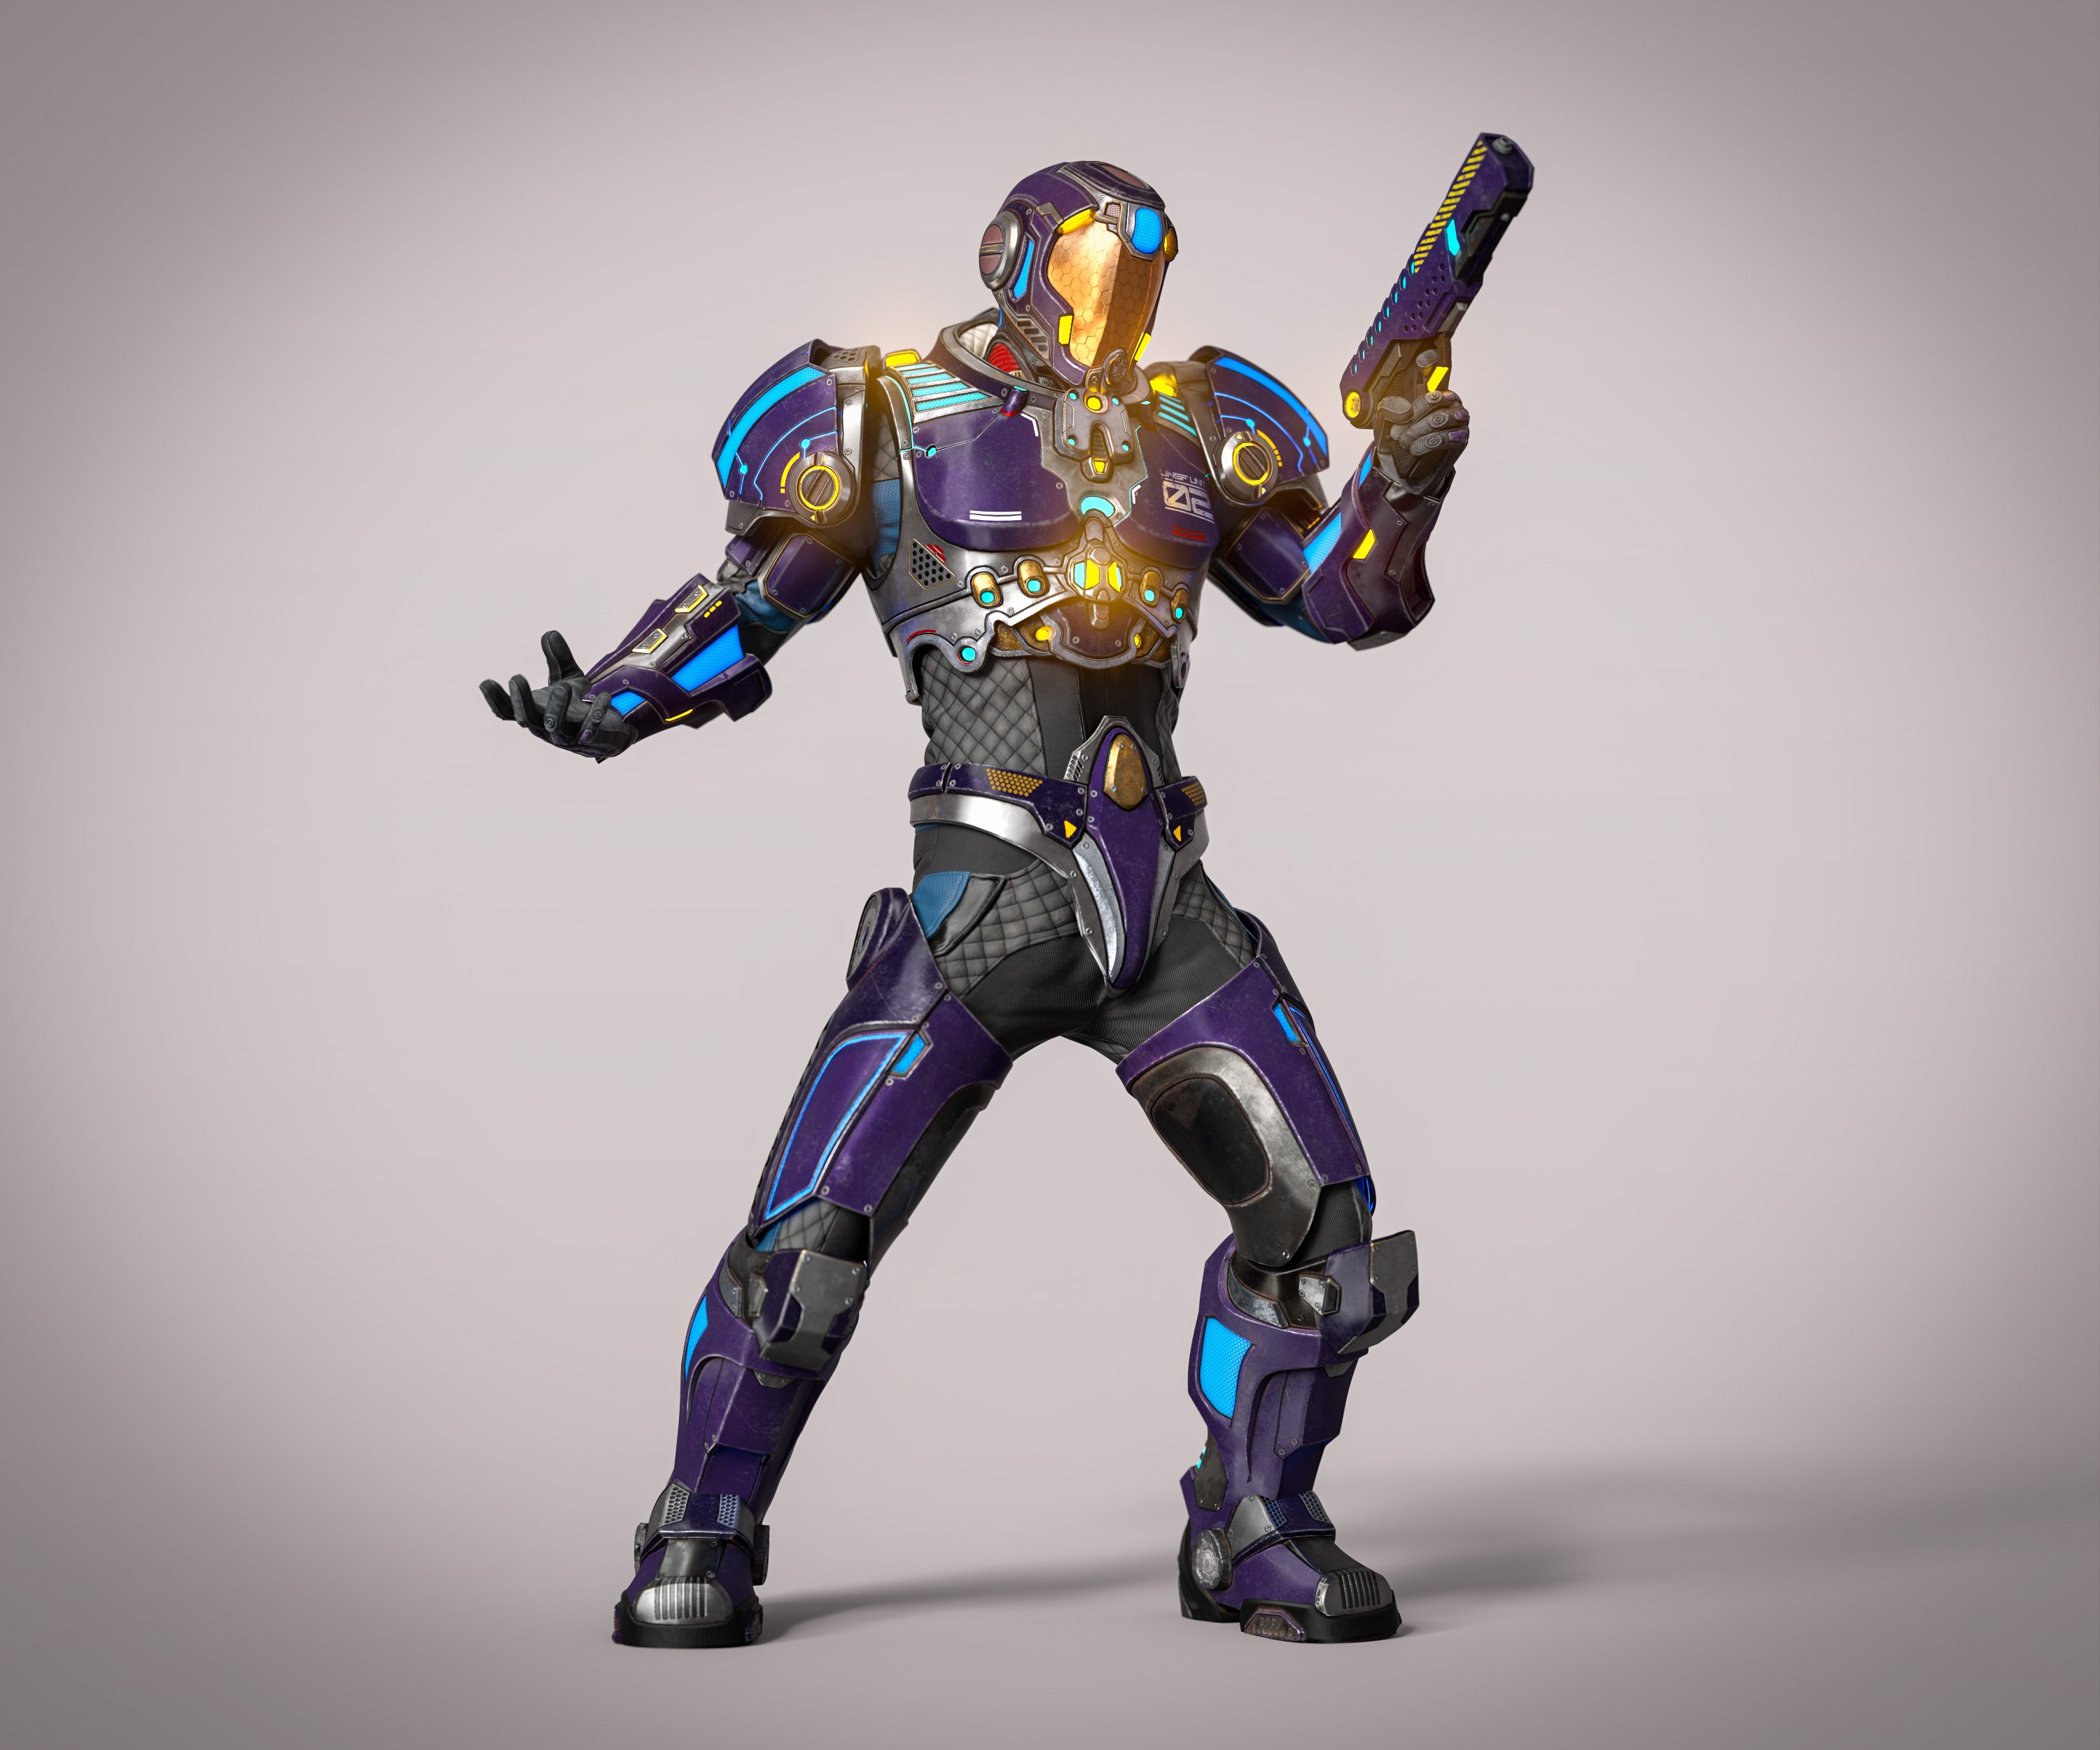 Intergalactic Soldier Armor for Genesis 8 and 8.1 Males